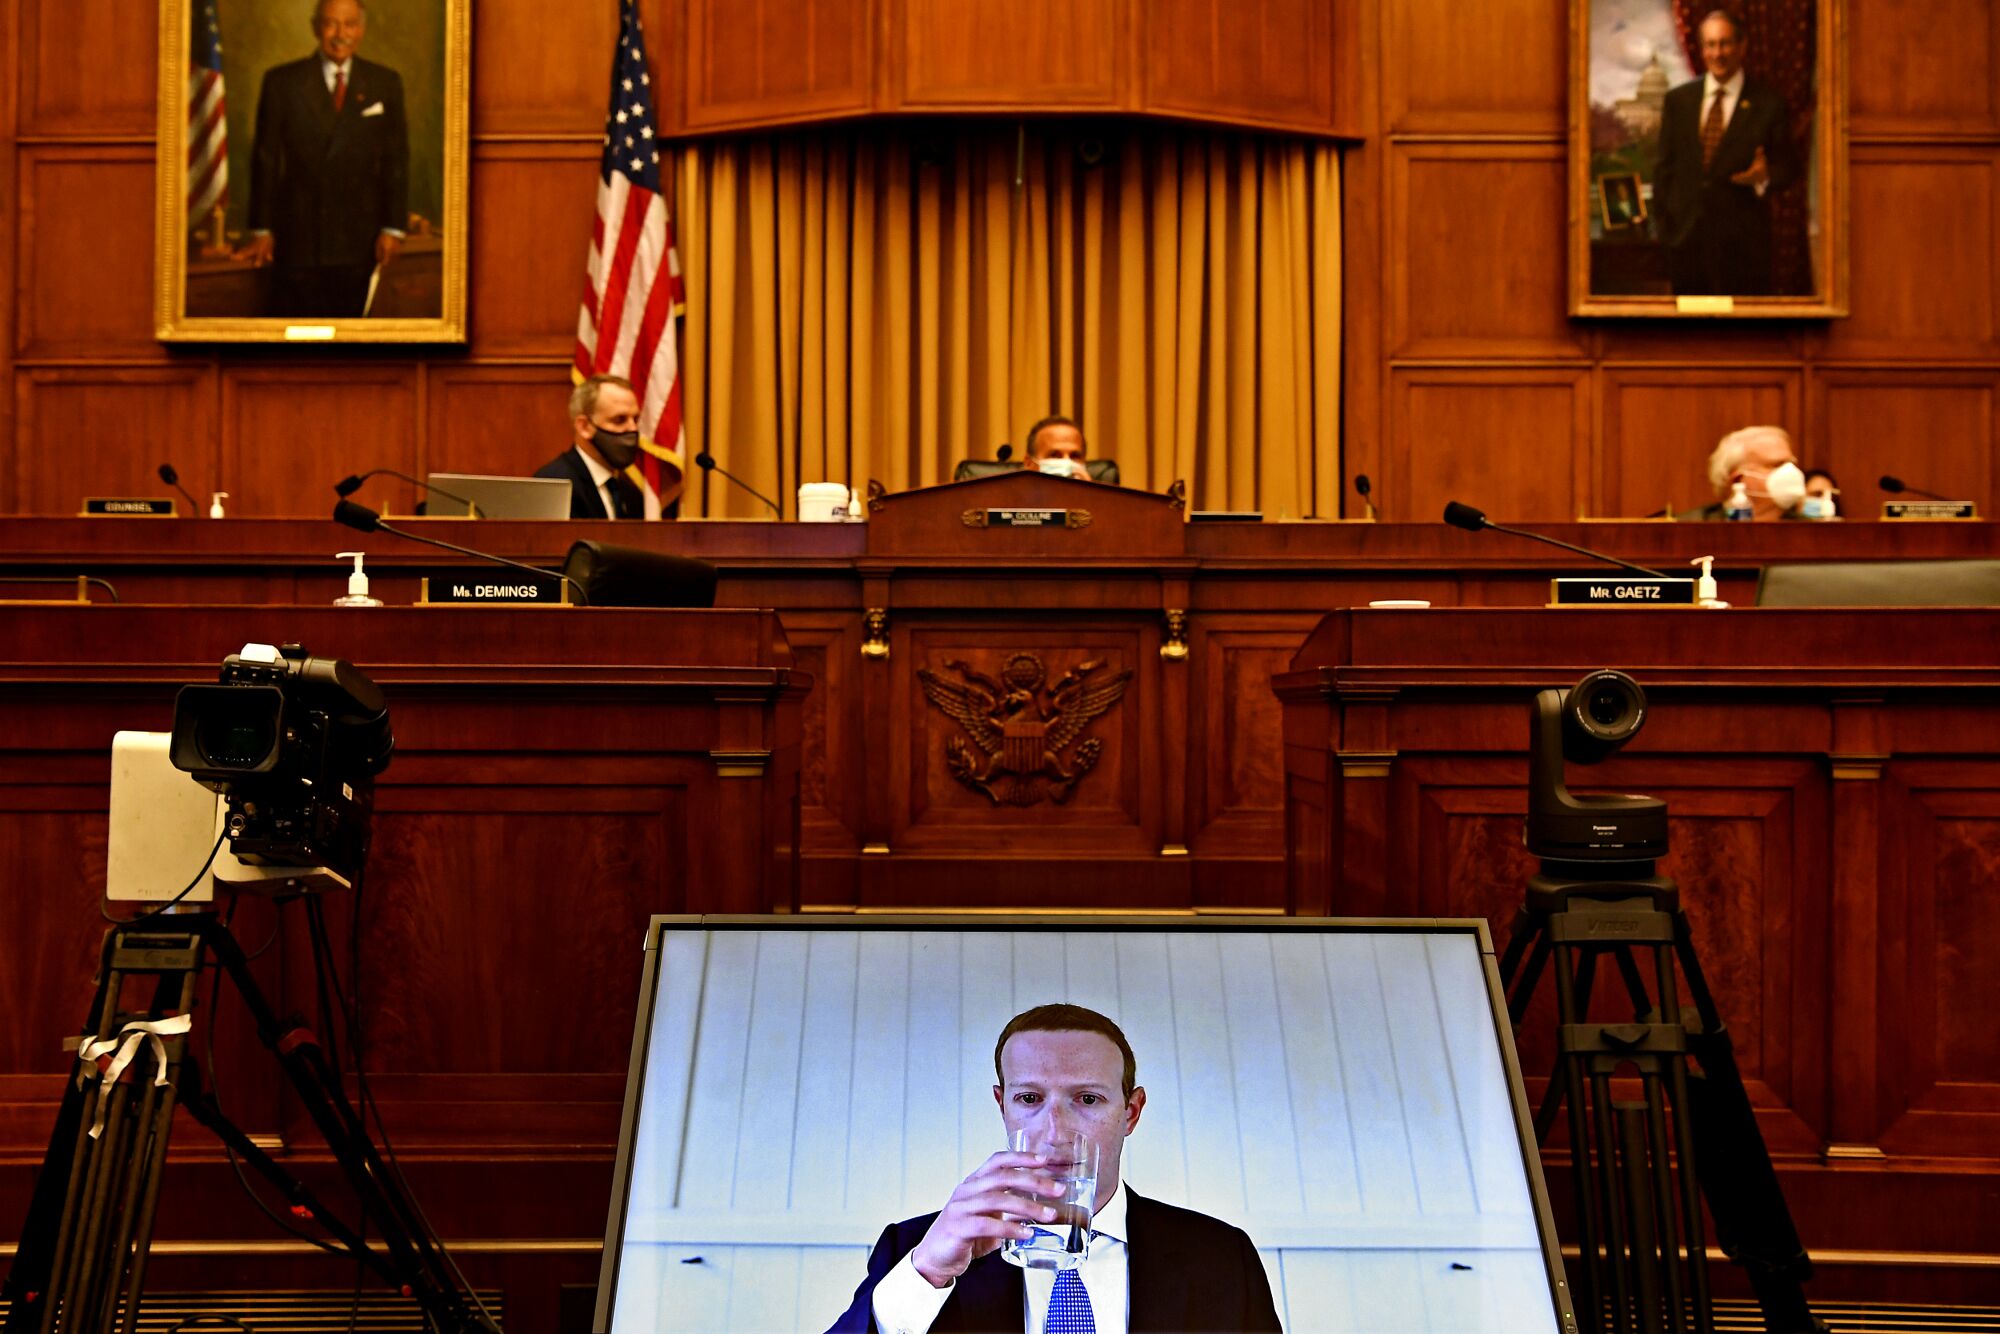 Facebook CEO Mark Zuckerberg is seen onscreen during remote testimony before House lawmakers on Capitol Hill.